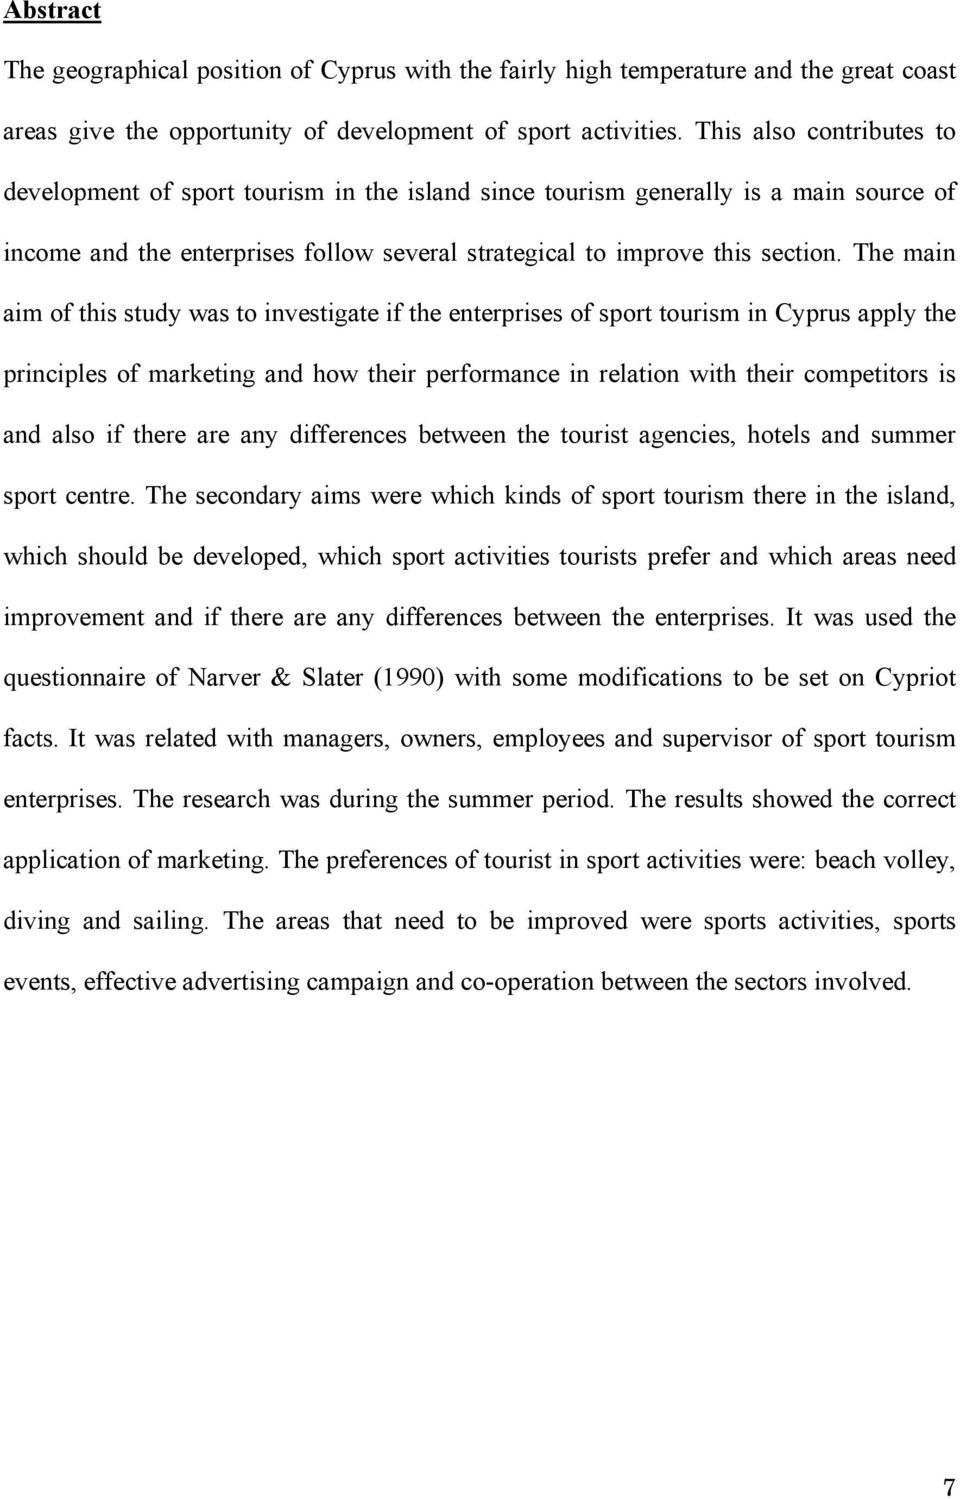 The main aim of this study was to investigate if the enterprises of sport tourism in Cyprus apply the principles of marketing and how their performance in relation with their competitors is and also